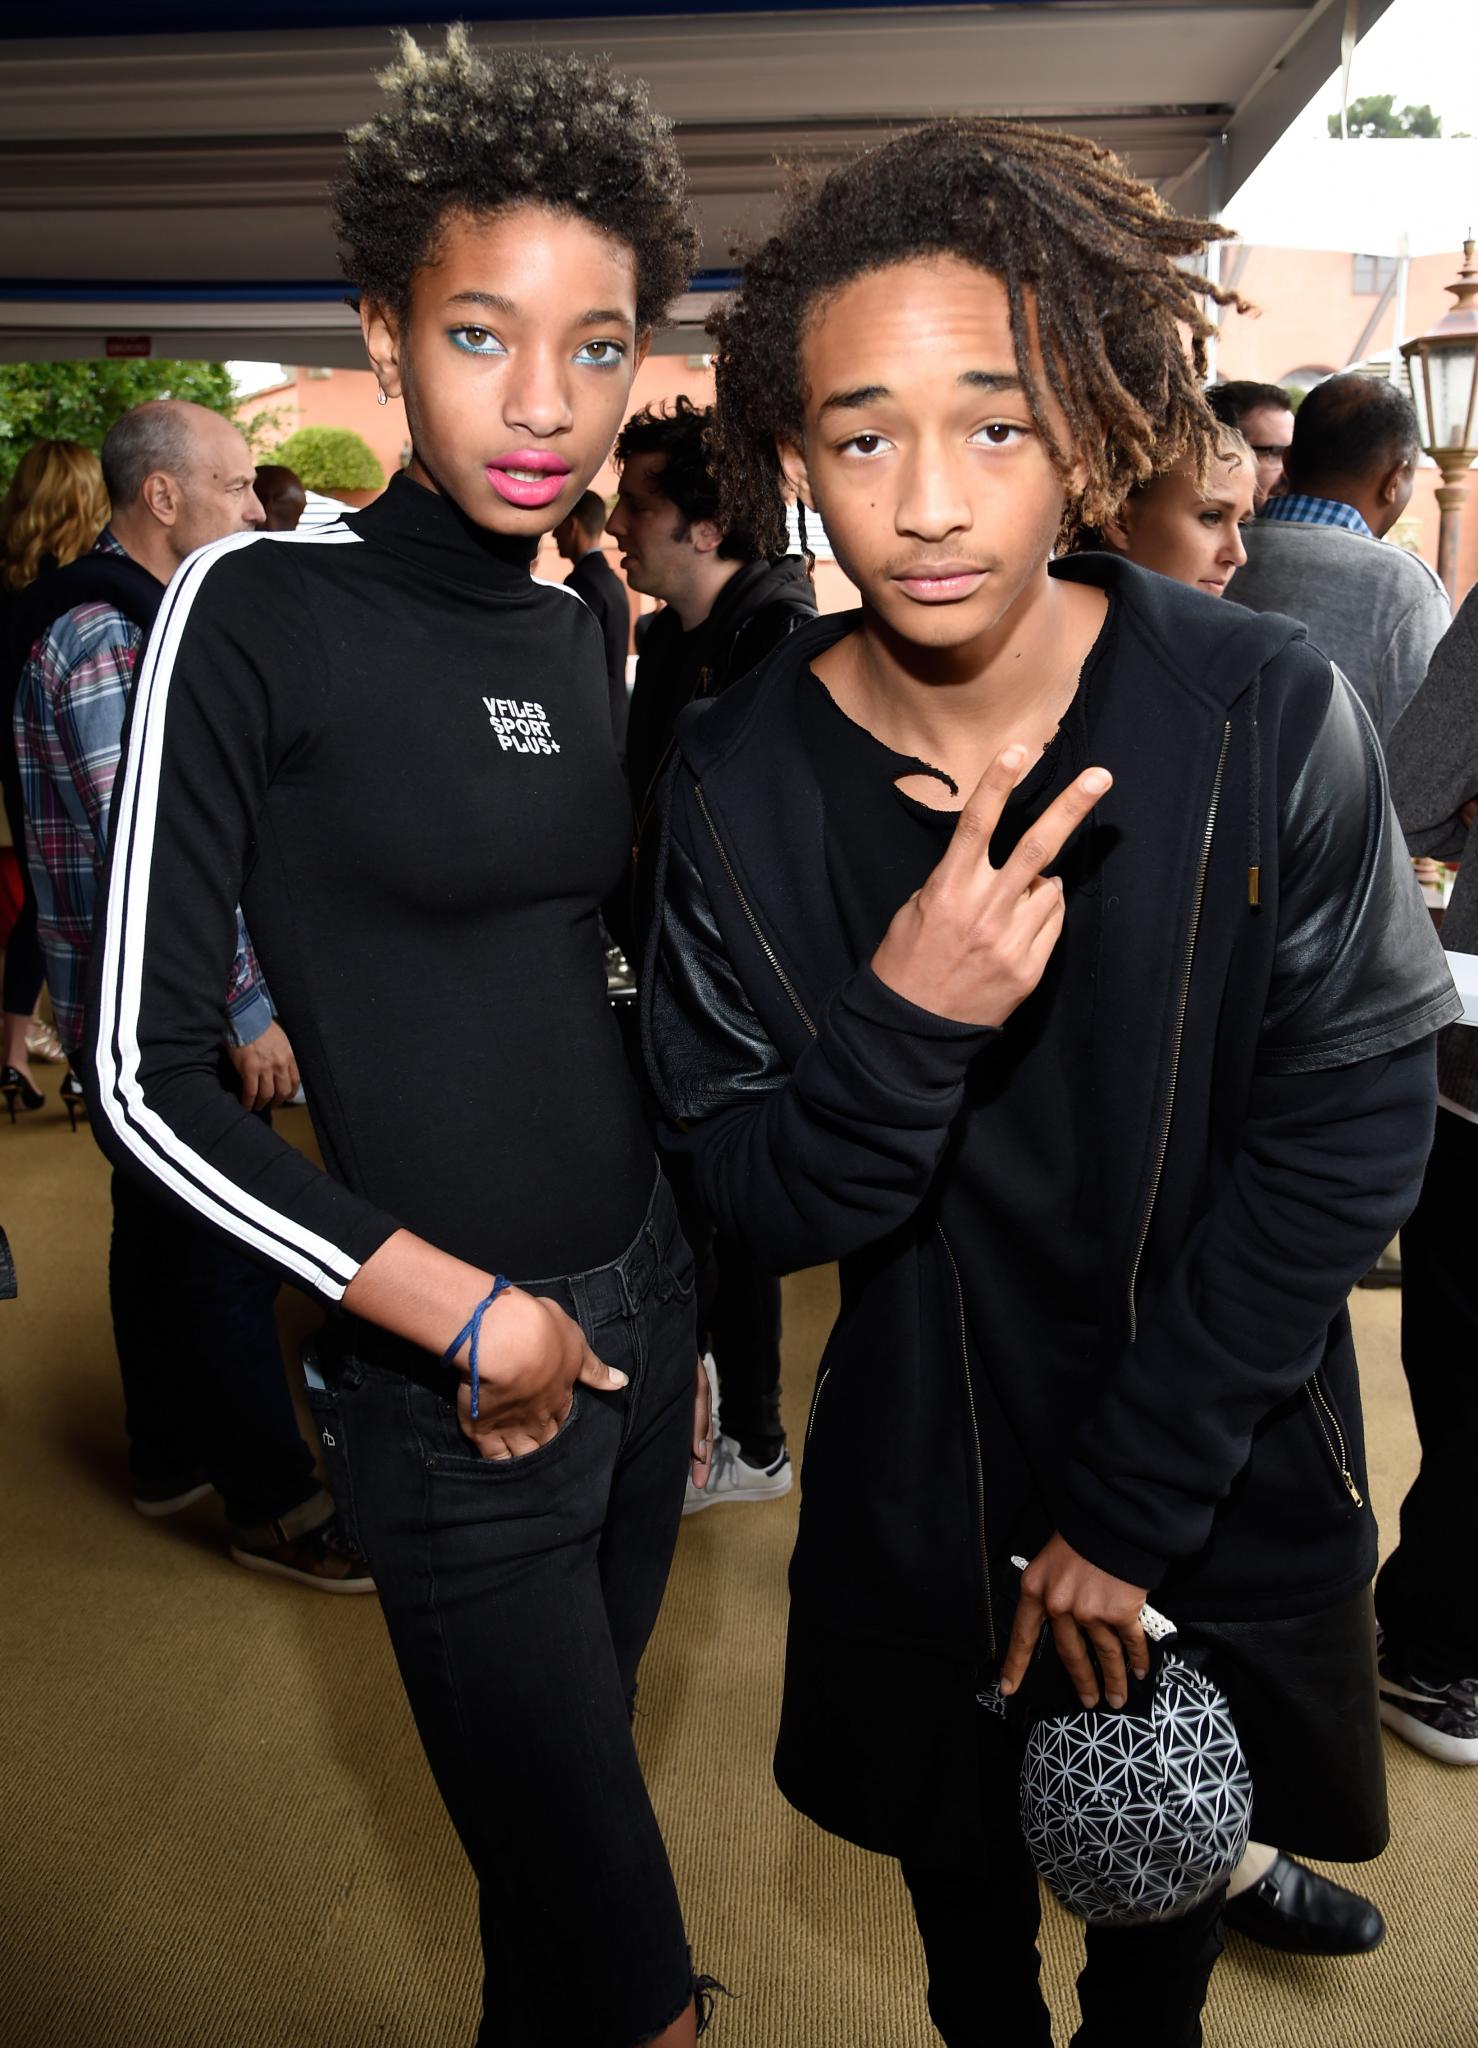 Reporter Faces Backlash After Scathing Article on Jaden and Willow Smith